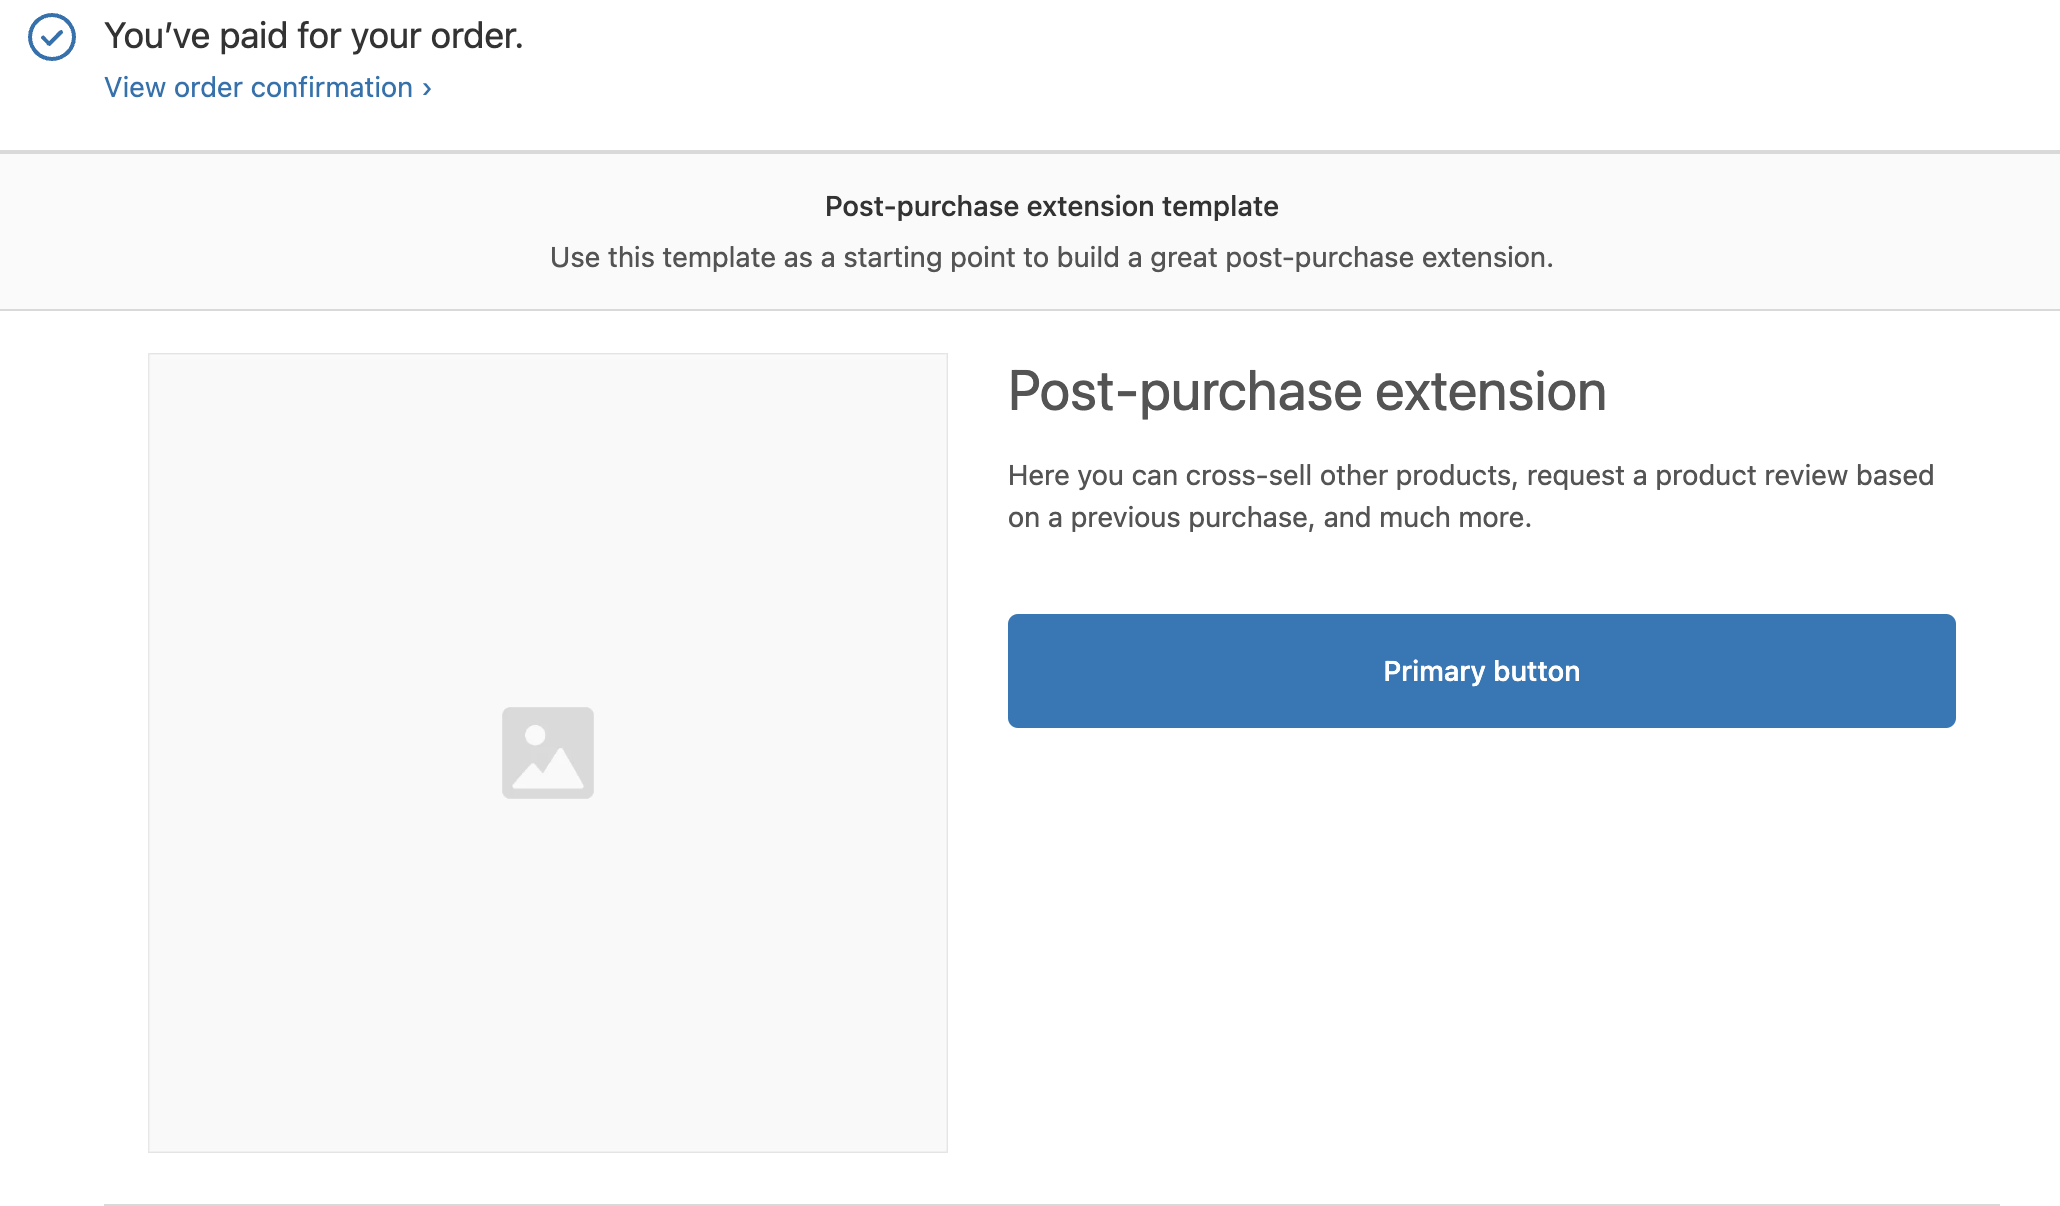 The post purchase page displaying an example primary button, image and offer